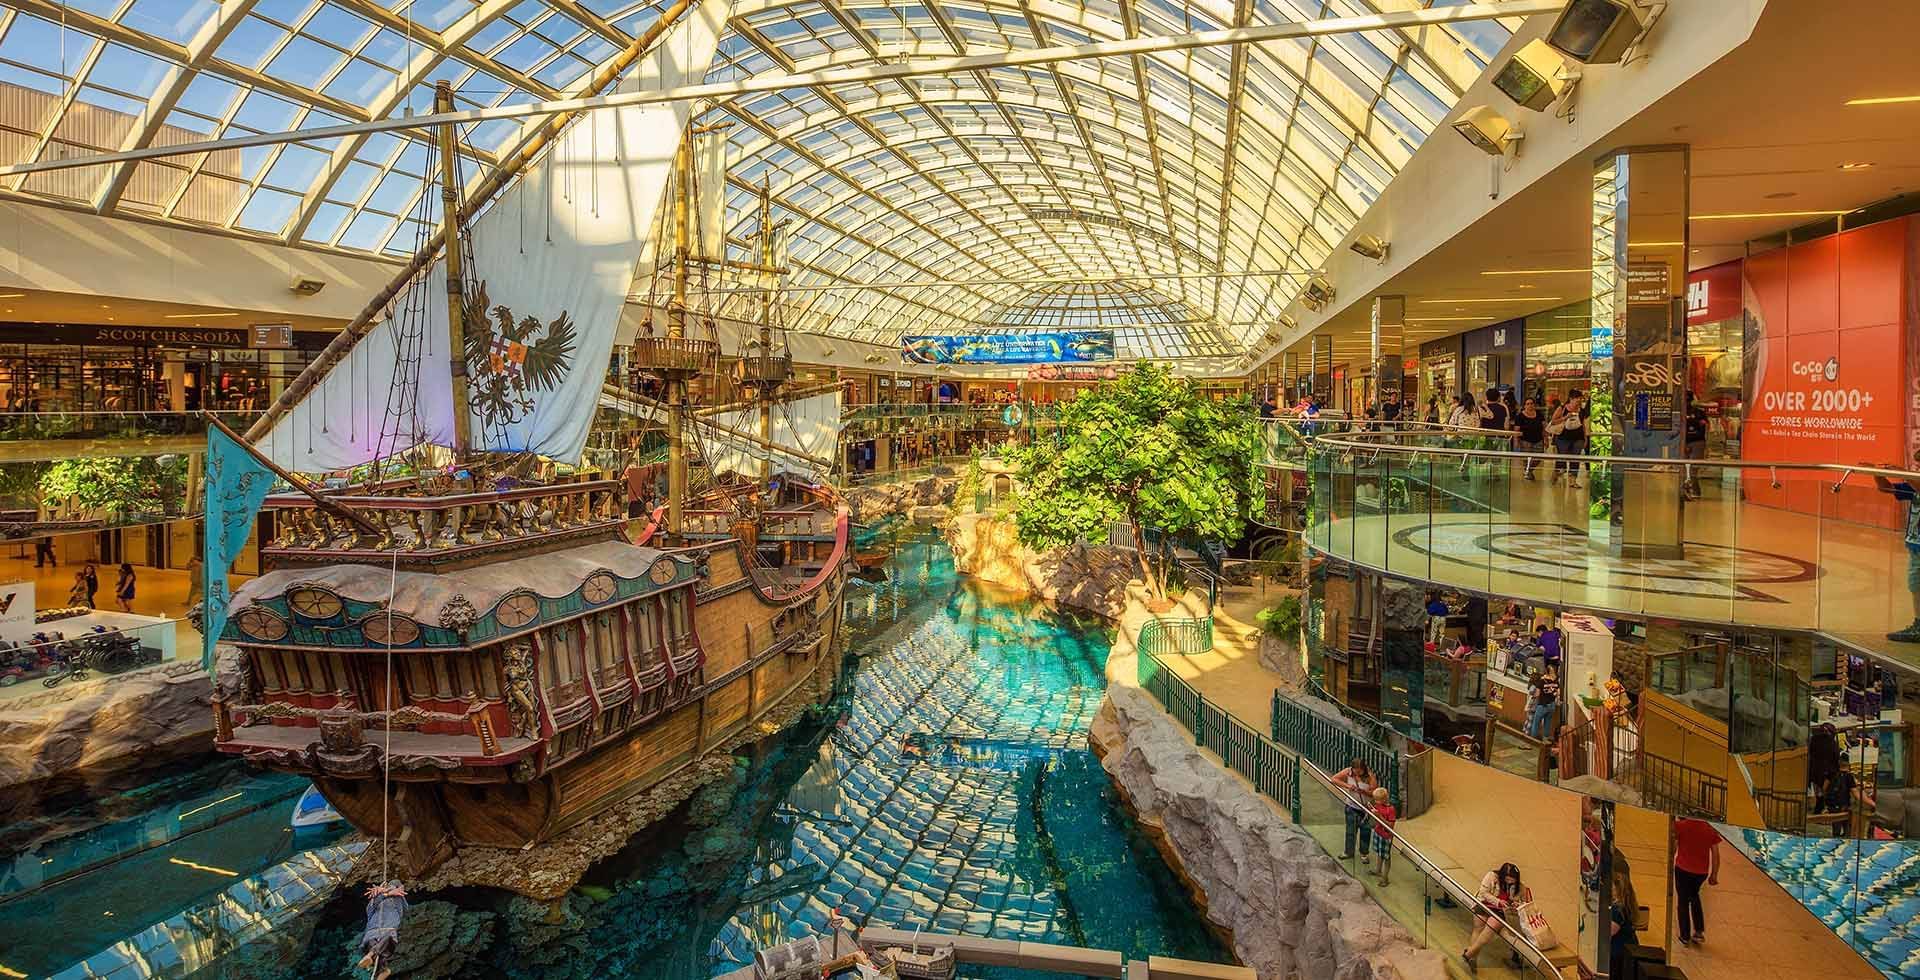 THE 10 CLOSEST Hotels to West Edmonton Mall